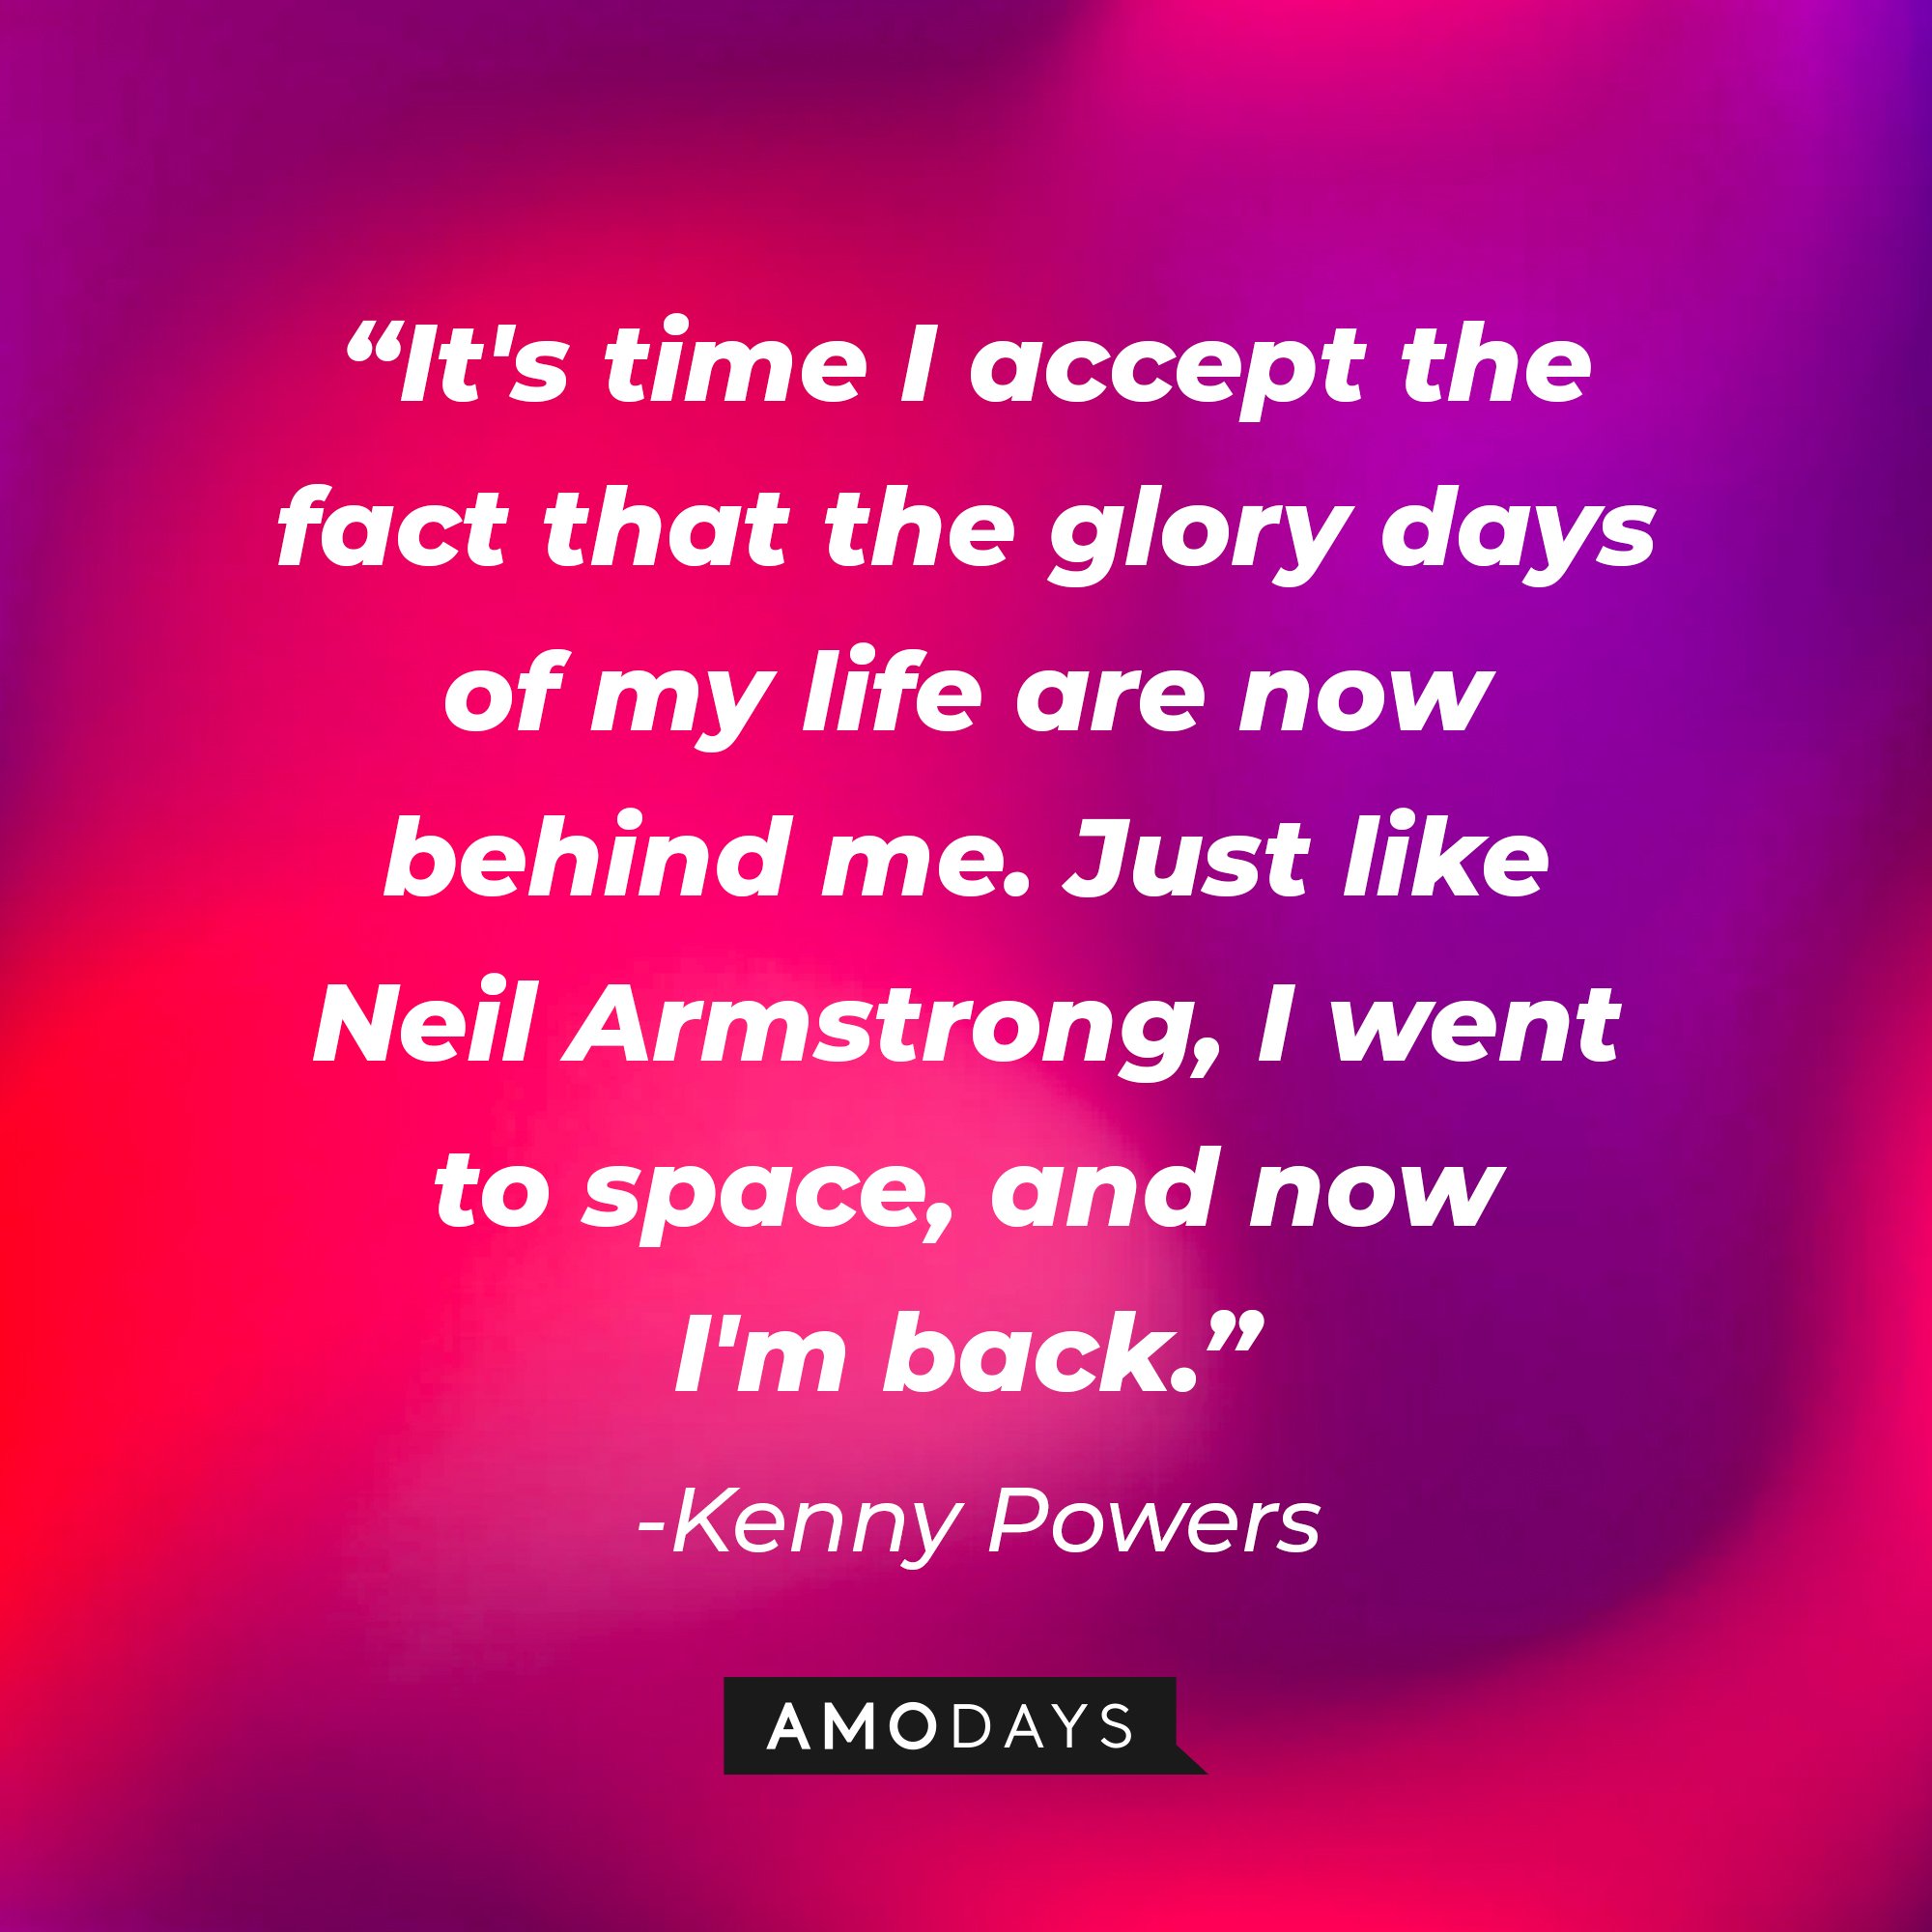  Kenny Powers' quote: “It's time I accept the fact that the glory days of my life are now behind me. Just like Neil Armstrong, I went to space, and now I'm back.” | Image: AmoDays